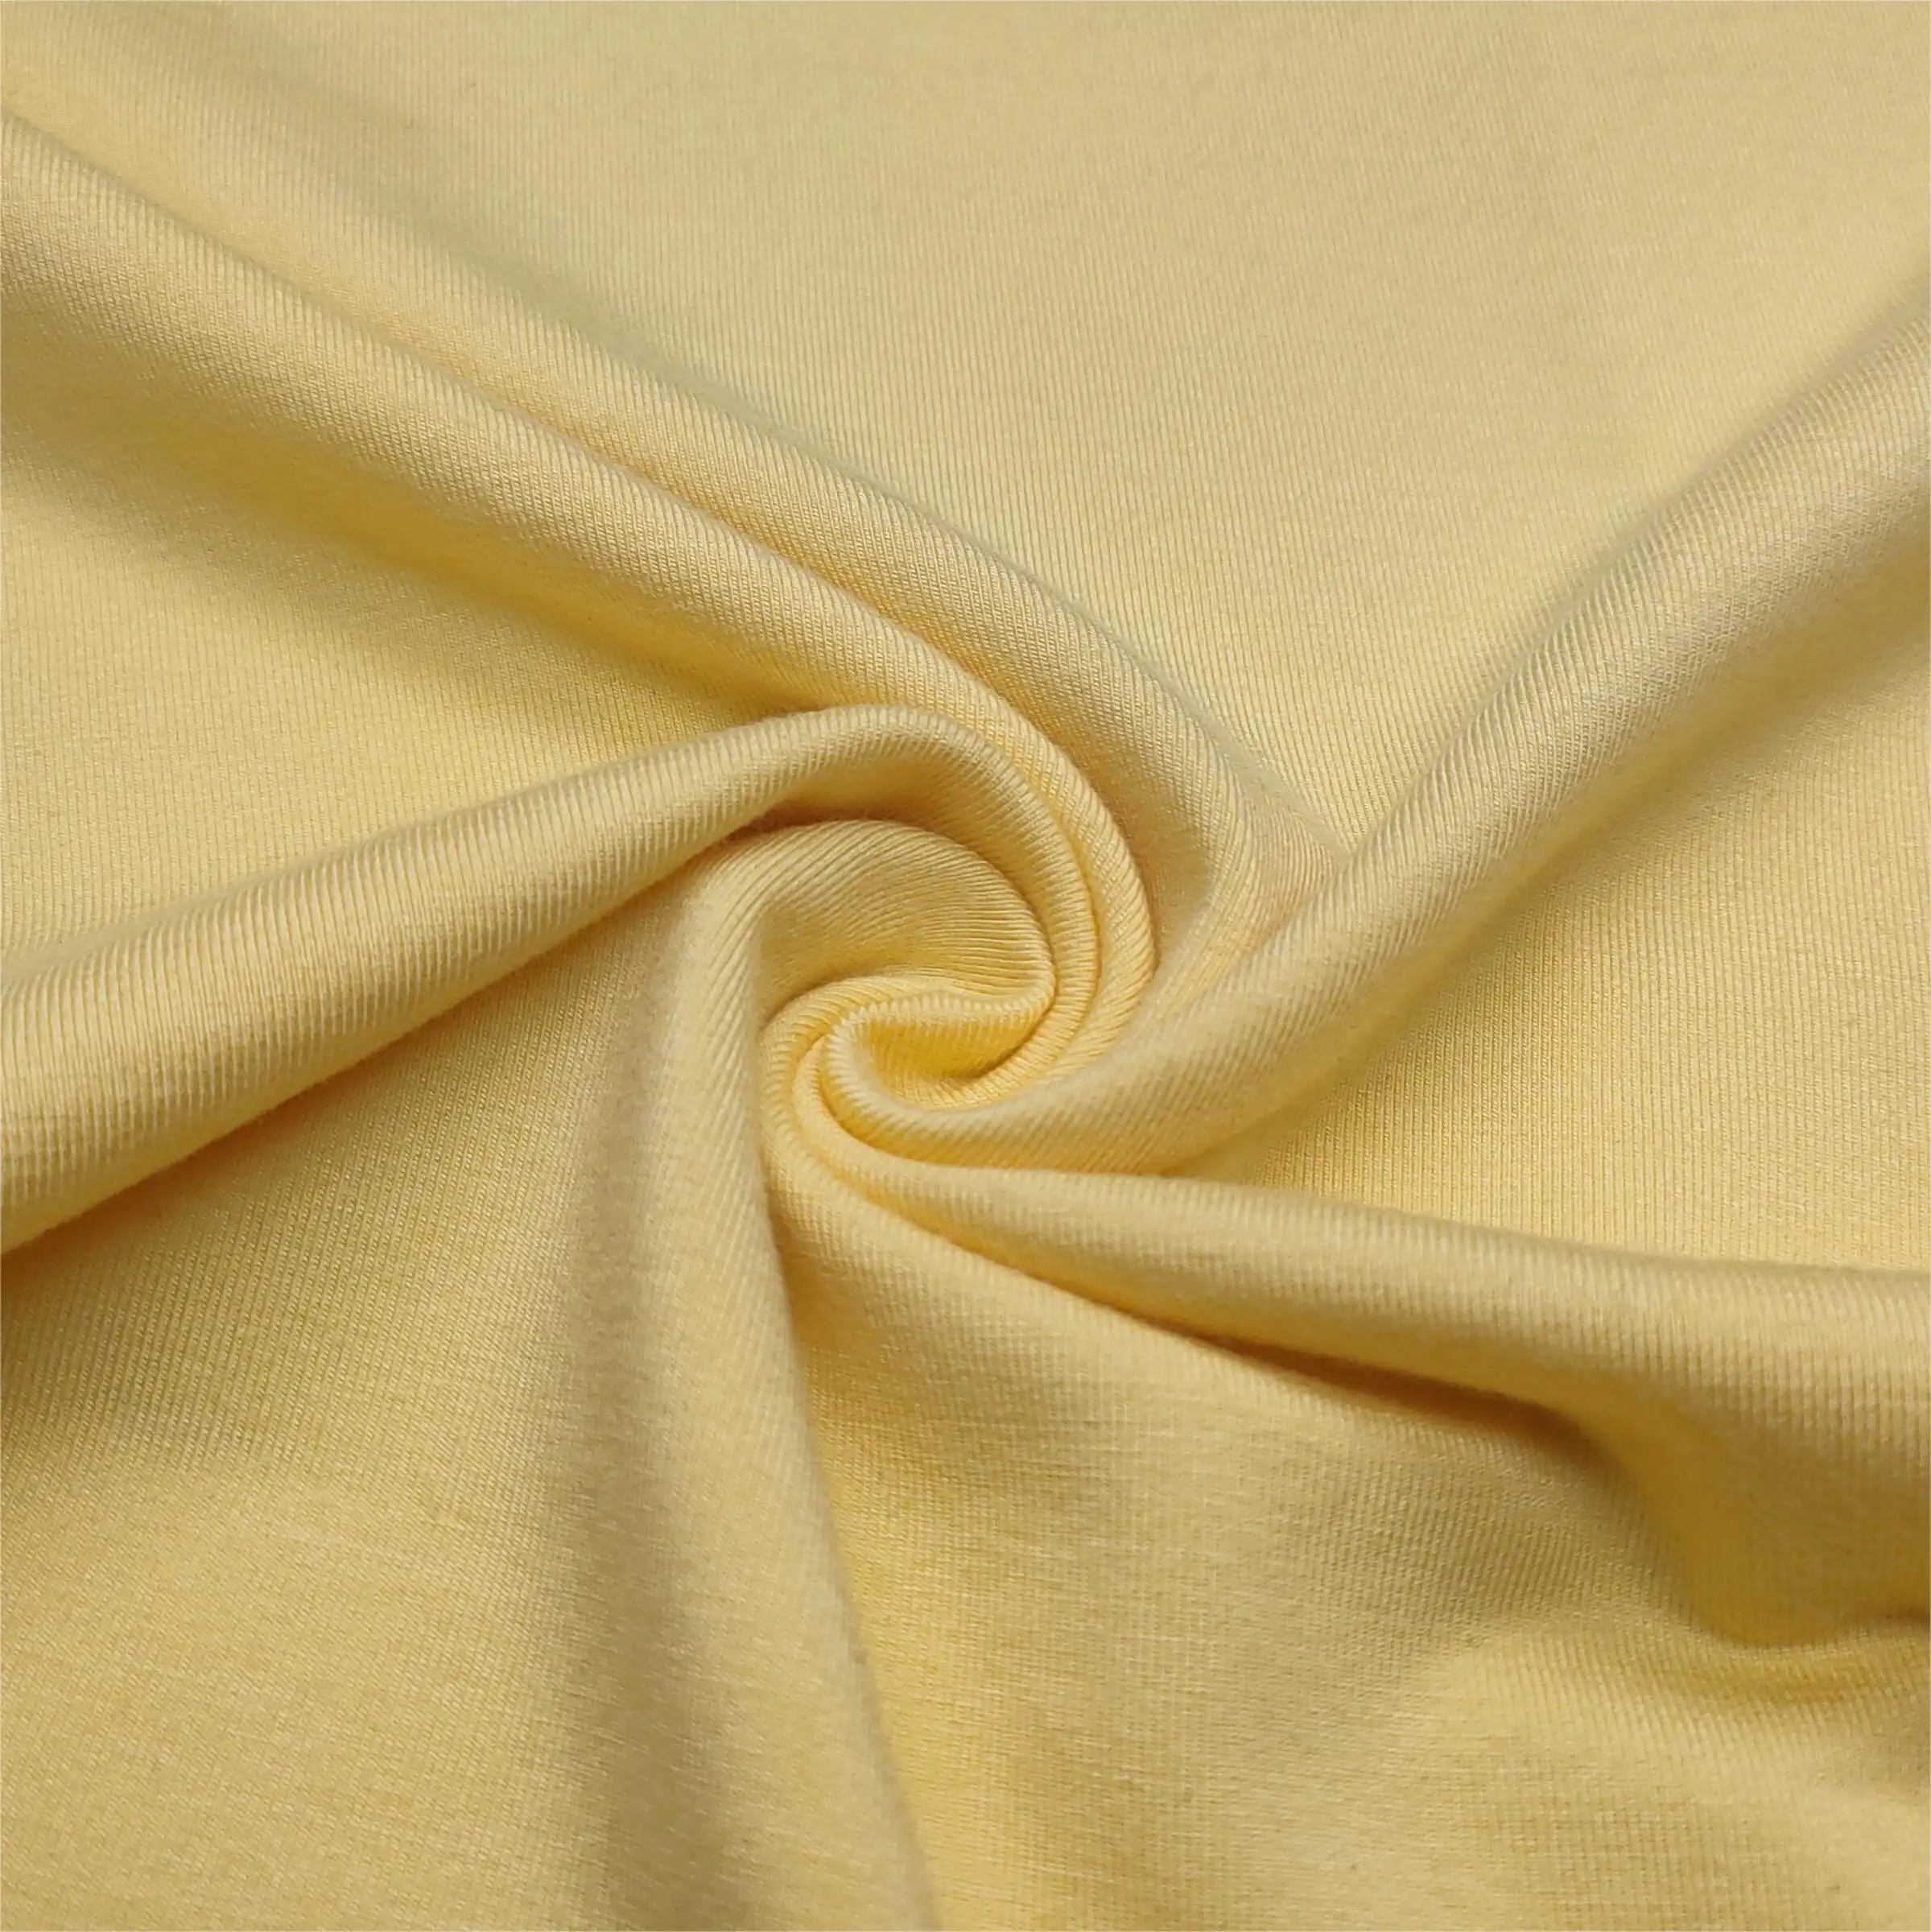 LJ2034-New knitted fabric 78%Madel 22%Spandex-fashionable and comfortable Jersey fabric in spring and summer